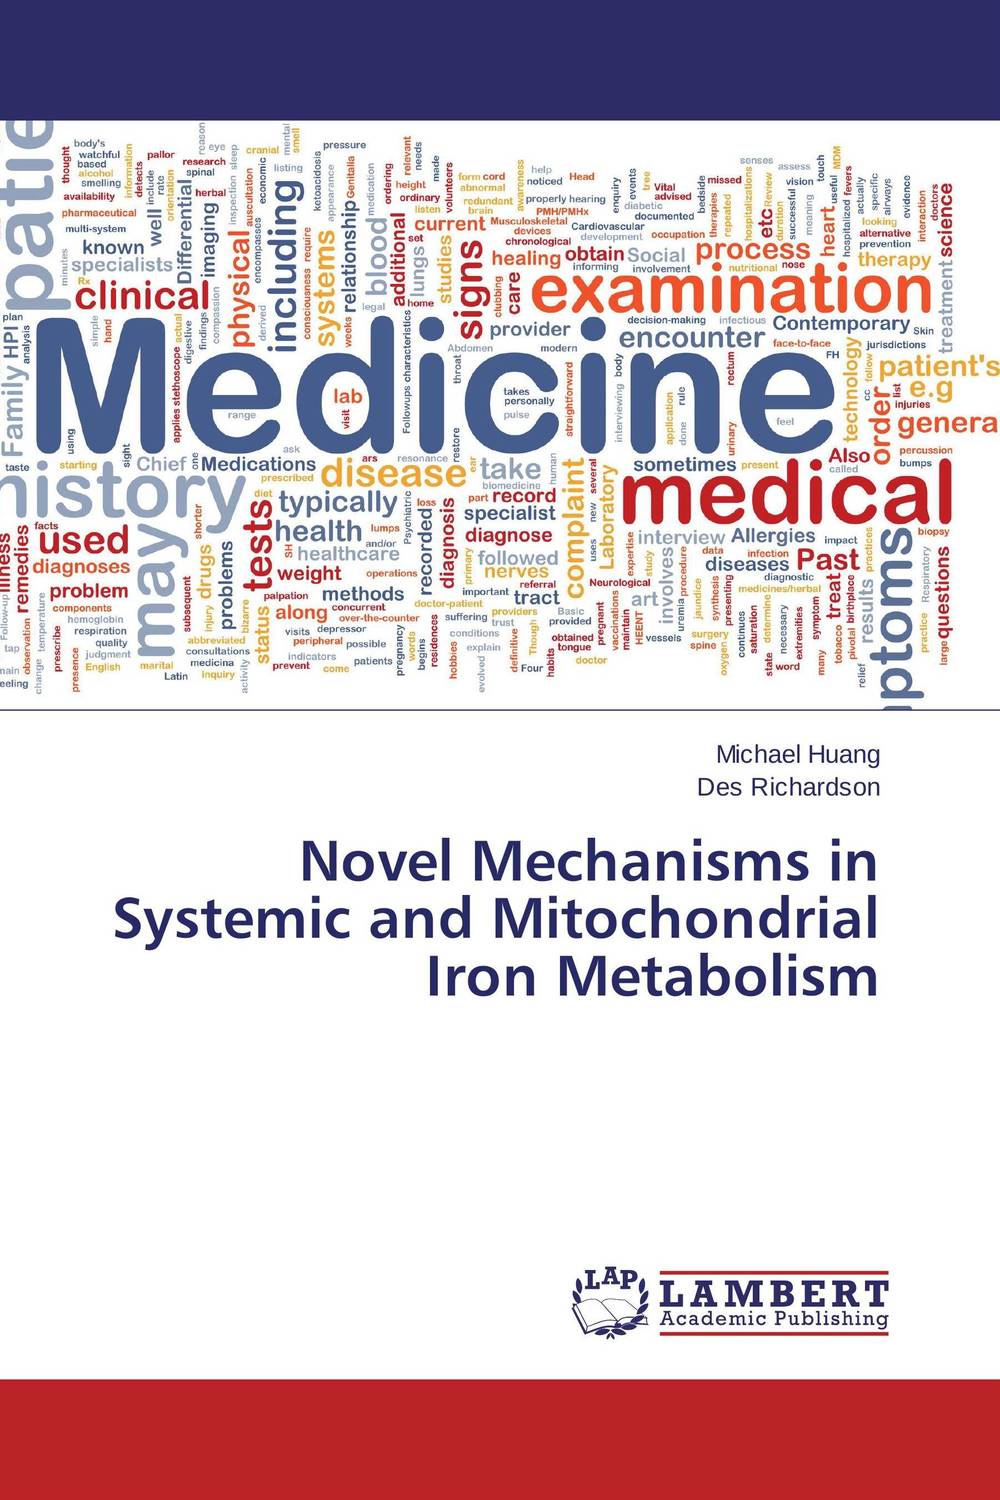 Novel Mechanisms in Systemic and Mitochondrial Iron Metabolism